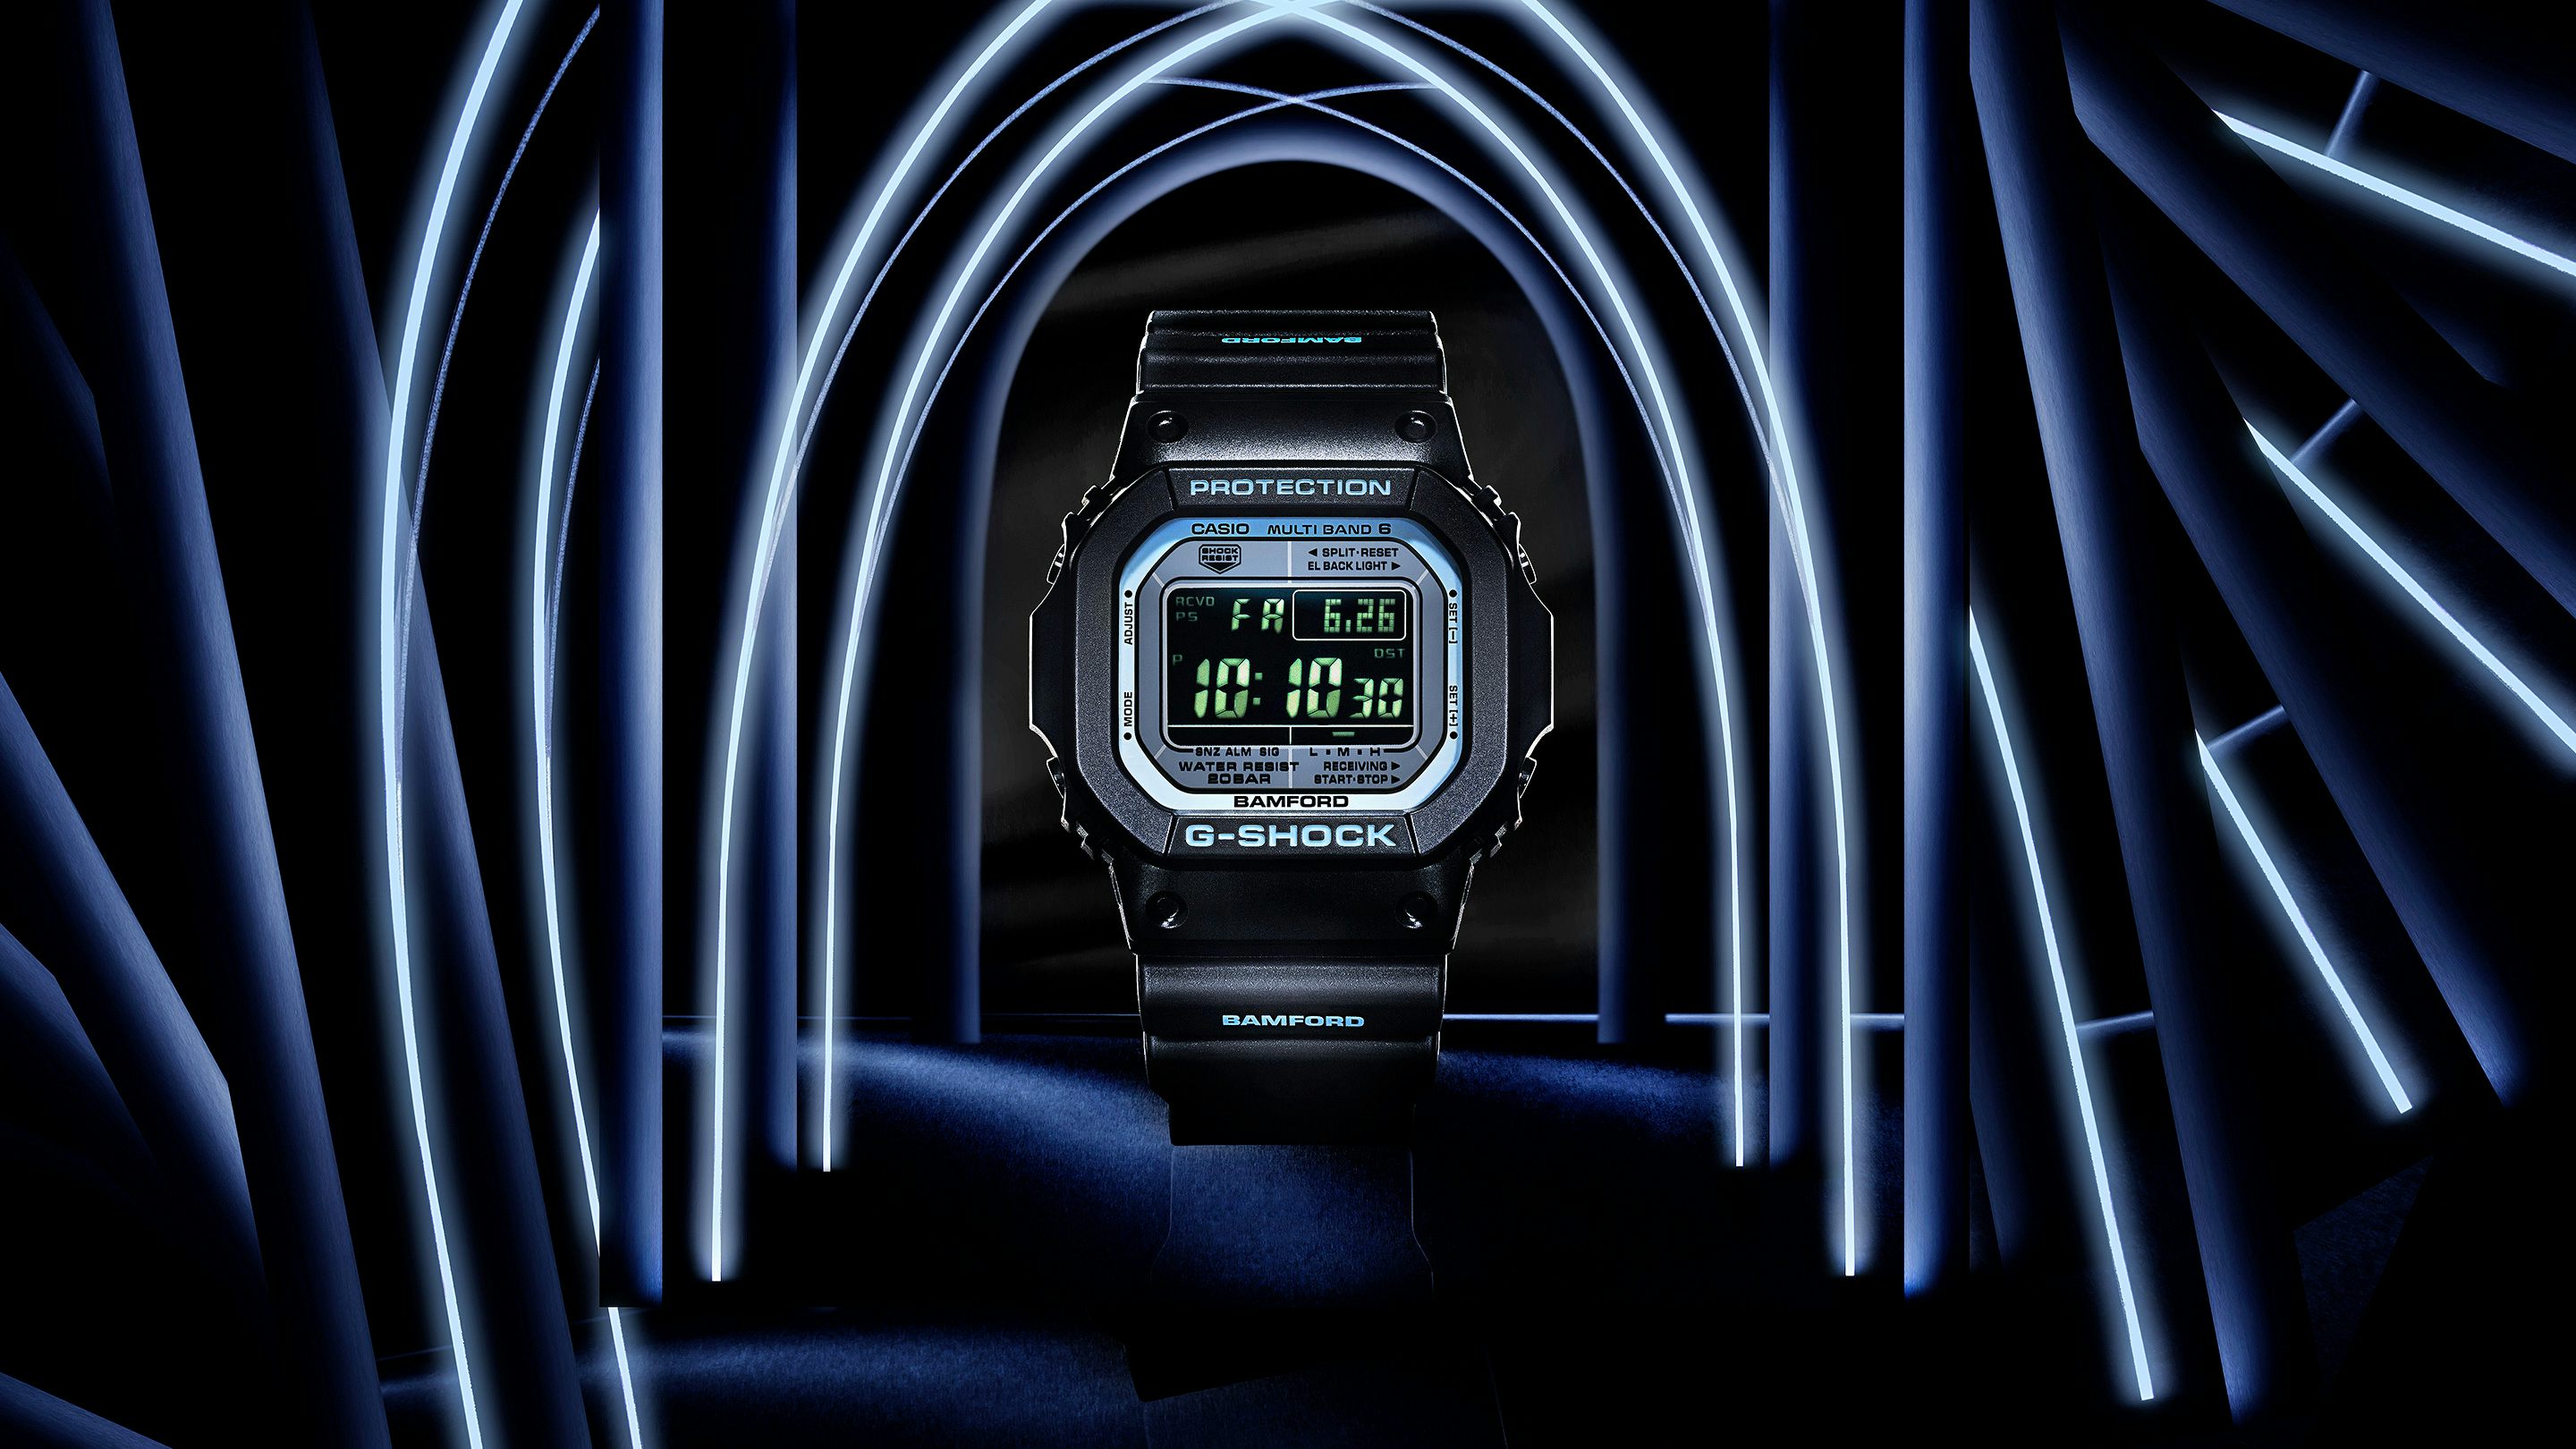 Stedord sædvanligt gispende Introducing: The Bamford London x G-Shock 5610 Limited Edition - Hodinkee